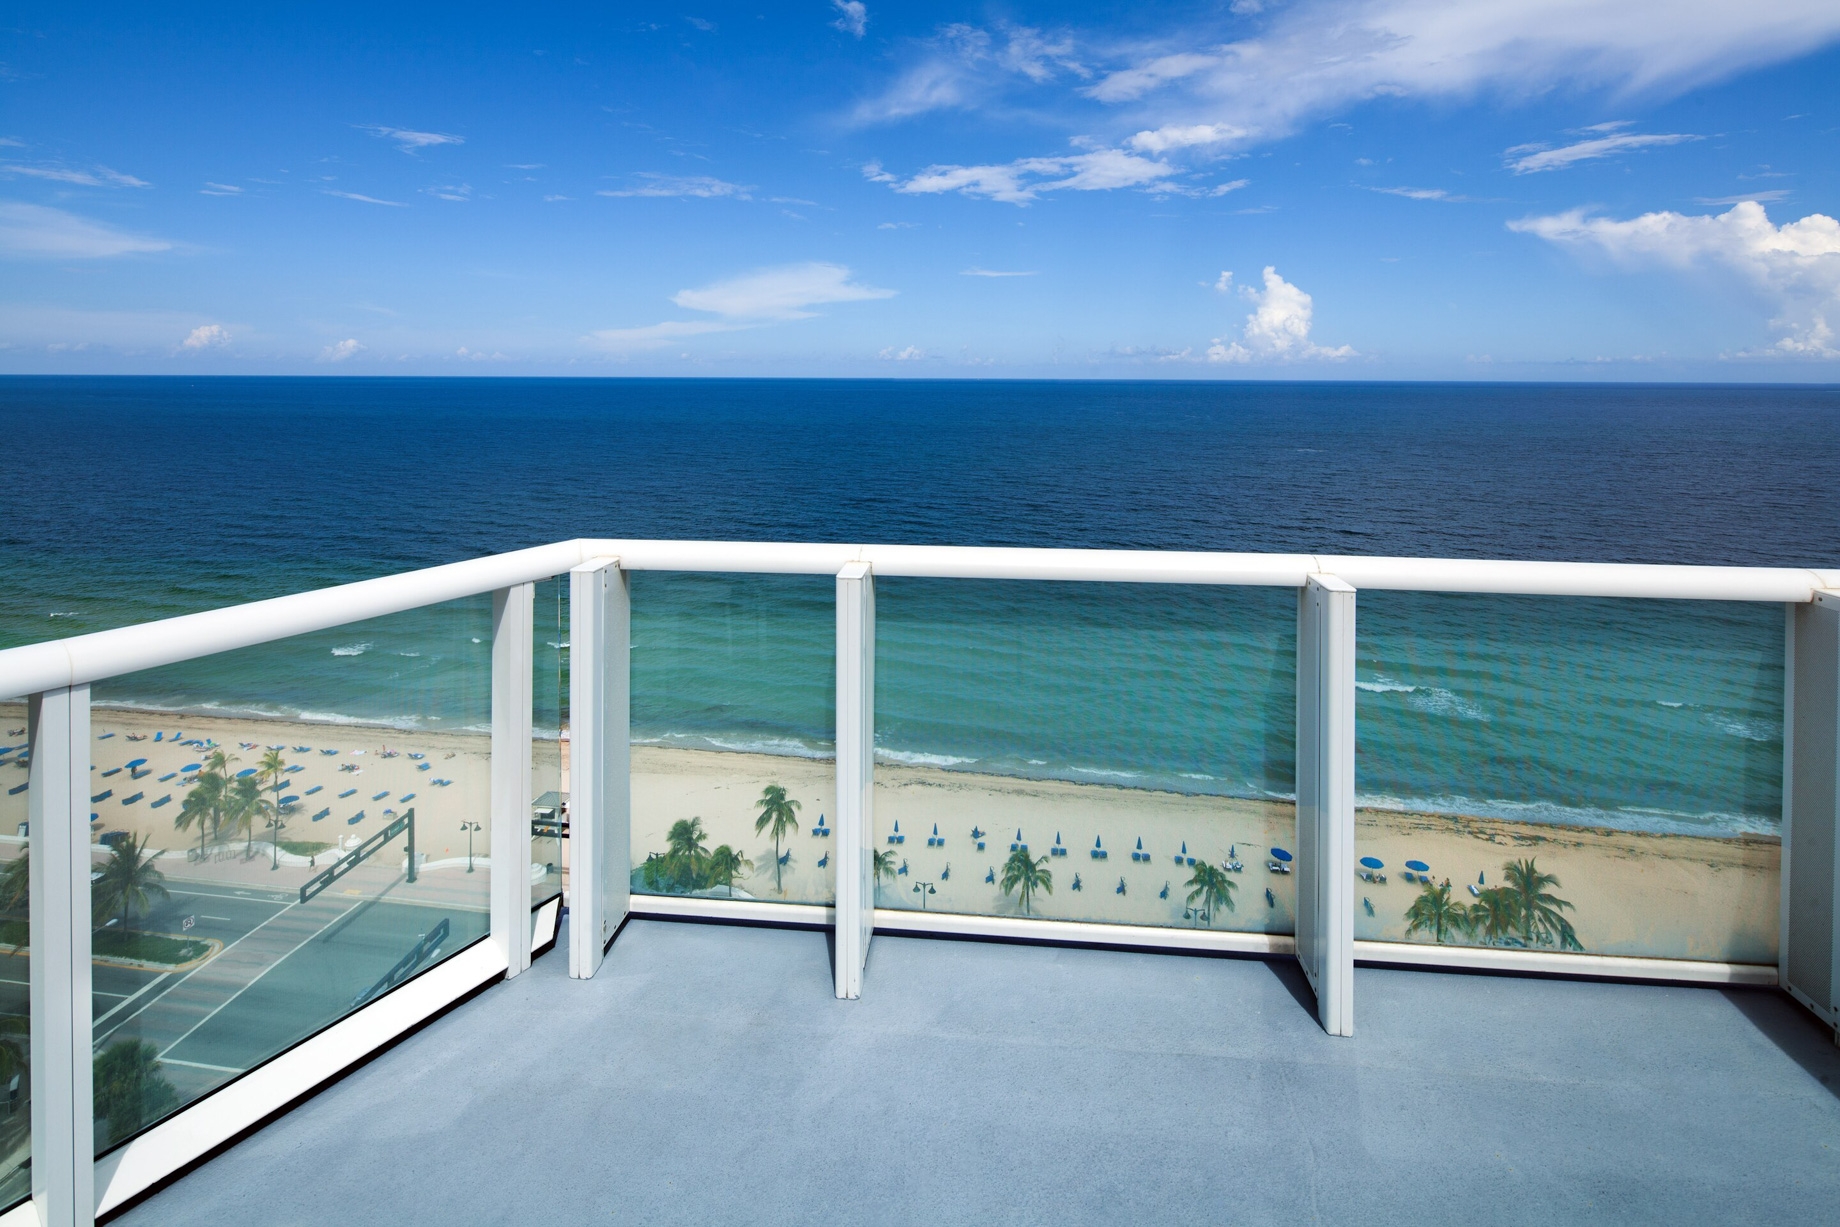 W Fort Lauderdale Hotel – Fort Lauderdale, FL, USA – Guest Room Oceanfront Balcony View